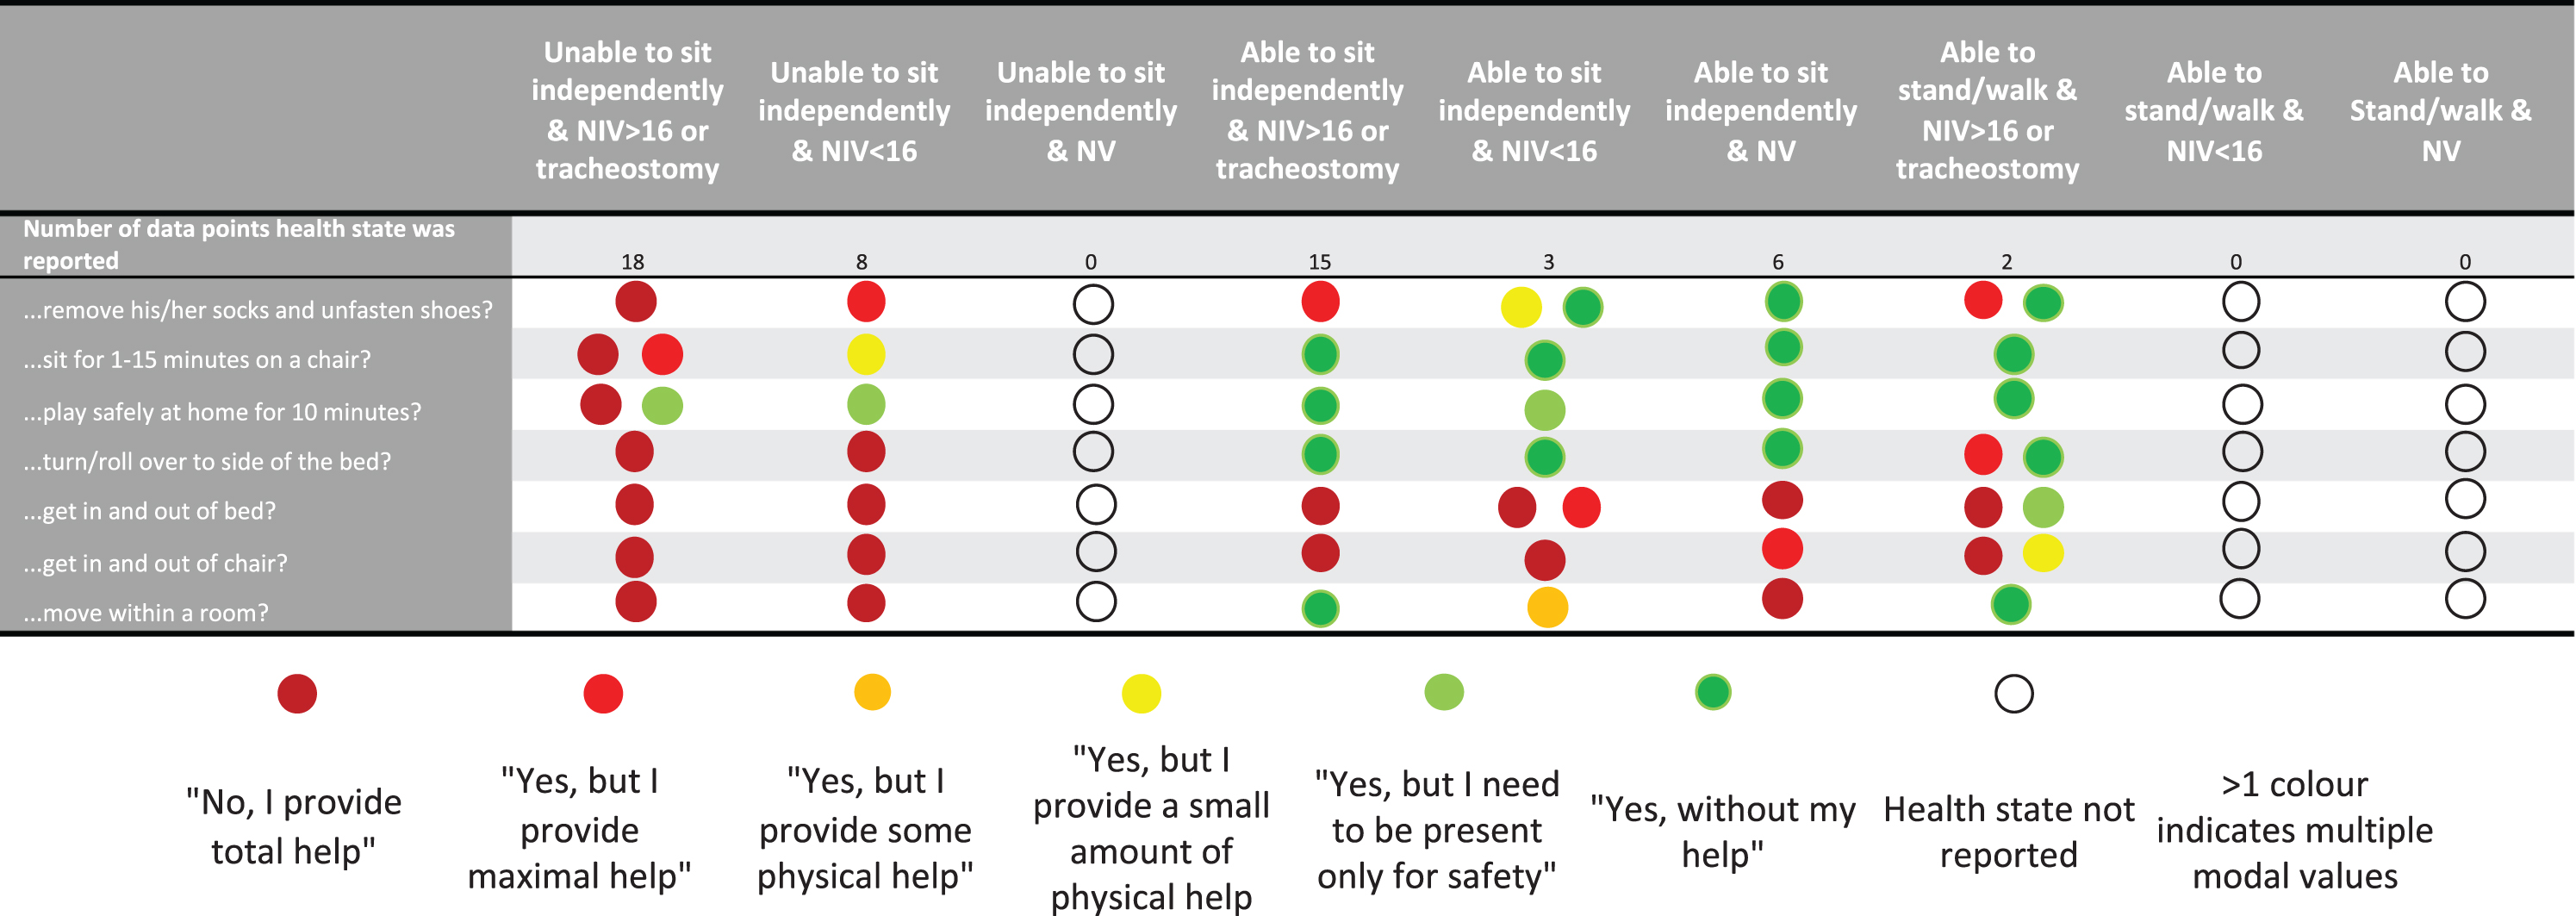 Modal values for selected ACEND items according to health states. (NIV = Non-invasive ventilation; NV = No ventilation). The colored dots represent different parent responses to questions on the ACEND questionnaire, as noted in the legend below the table.